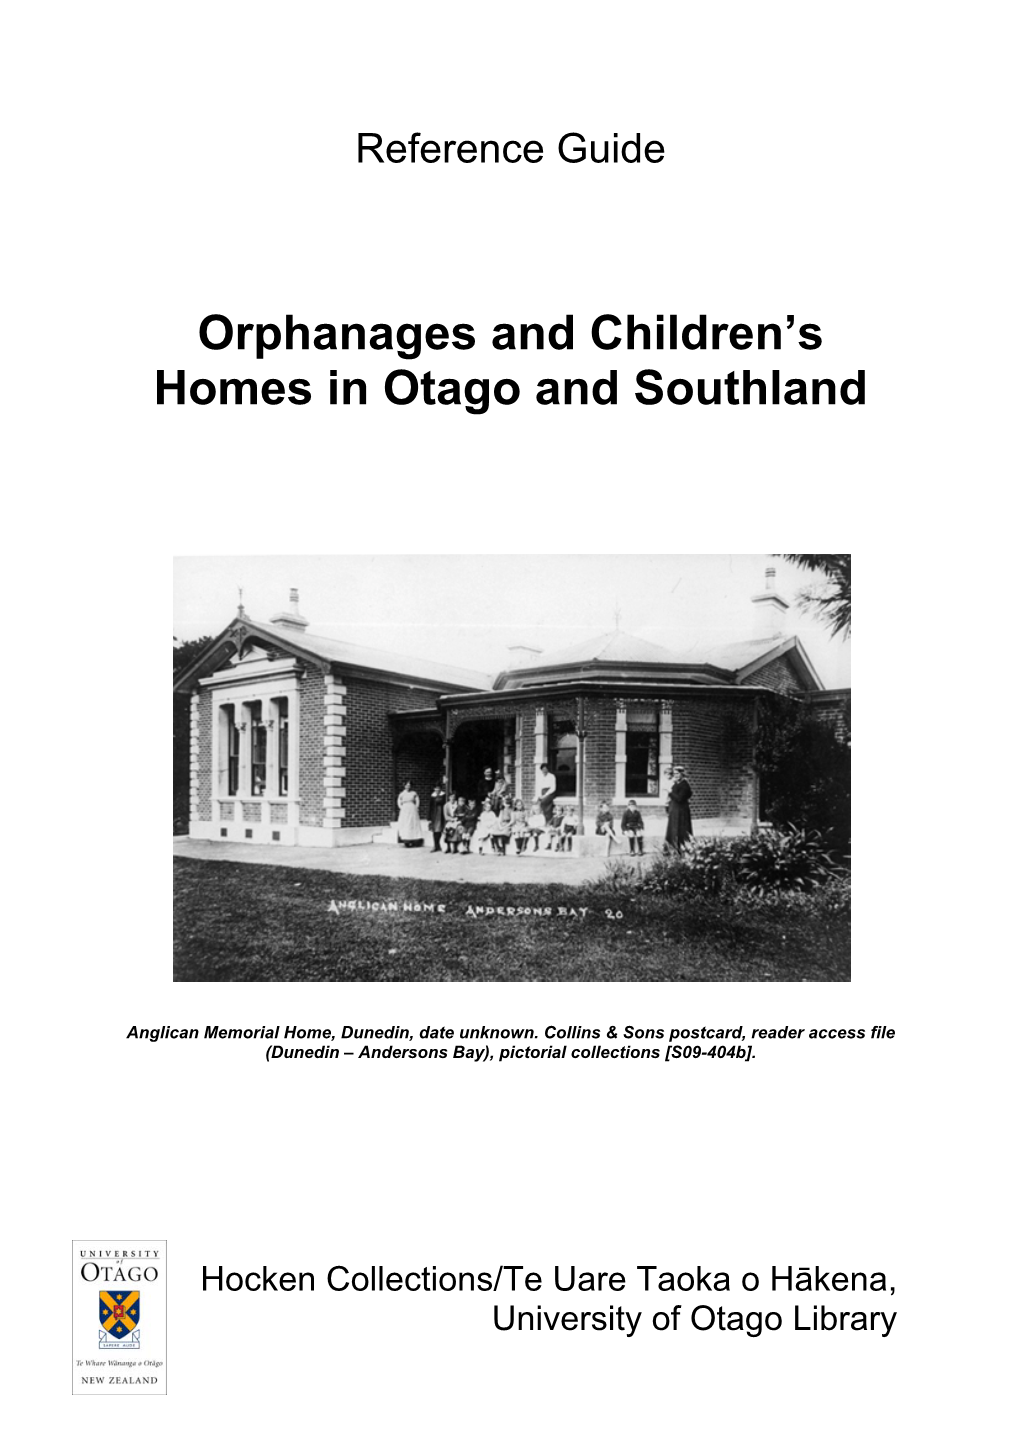 Orphanages and Children's Homes in Otago and Southland